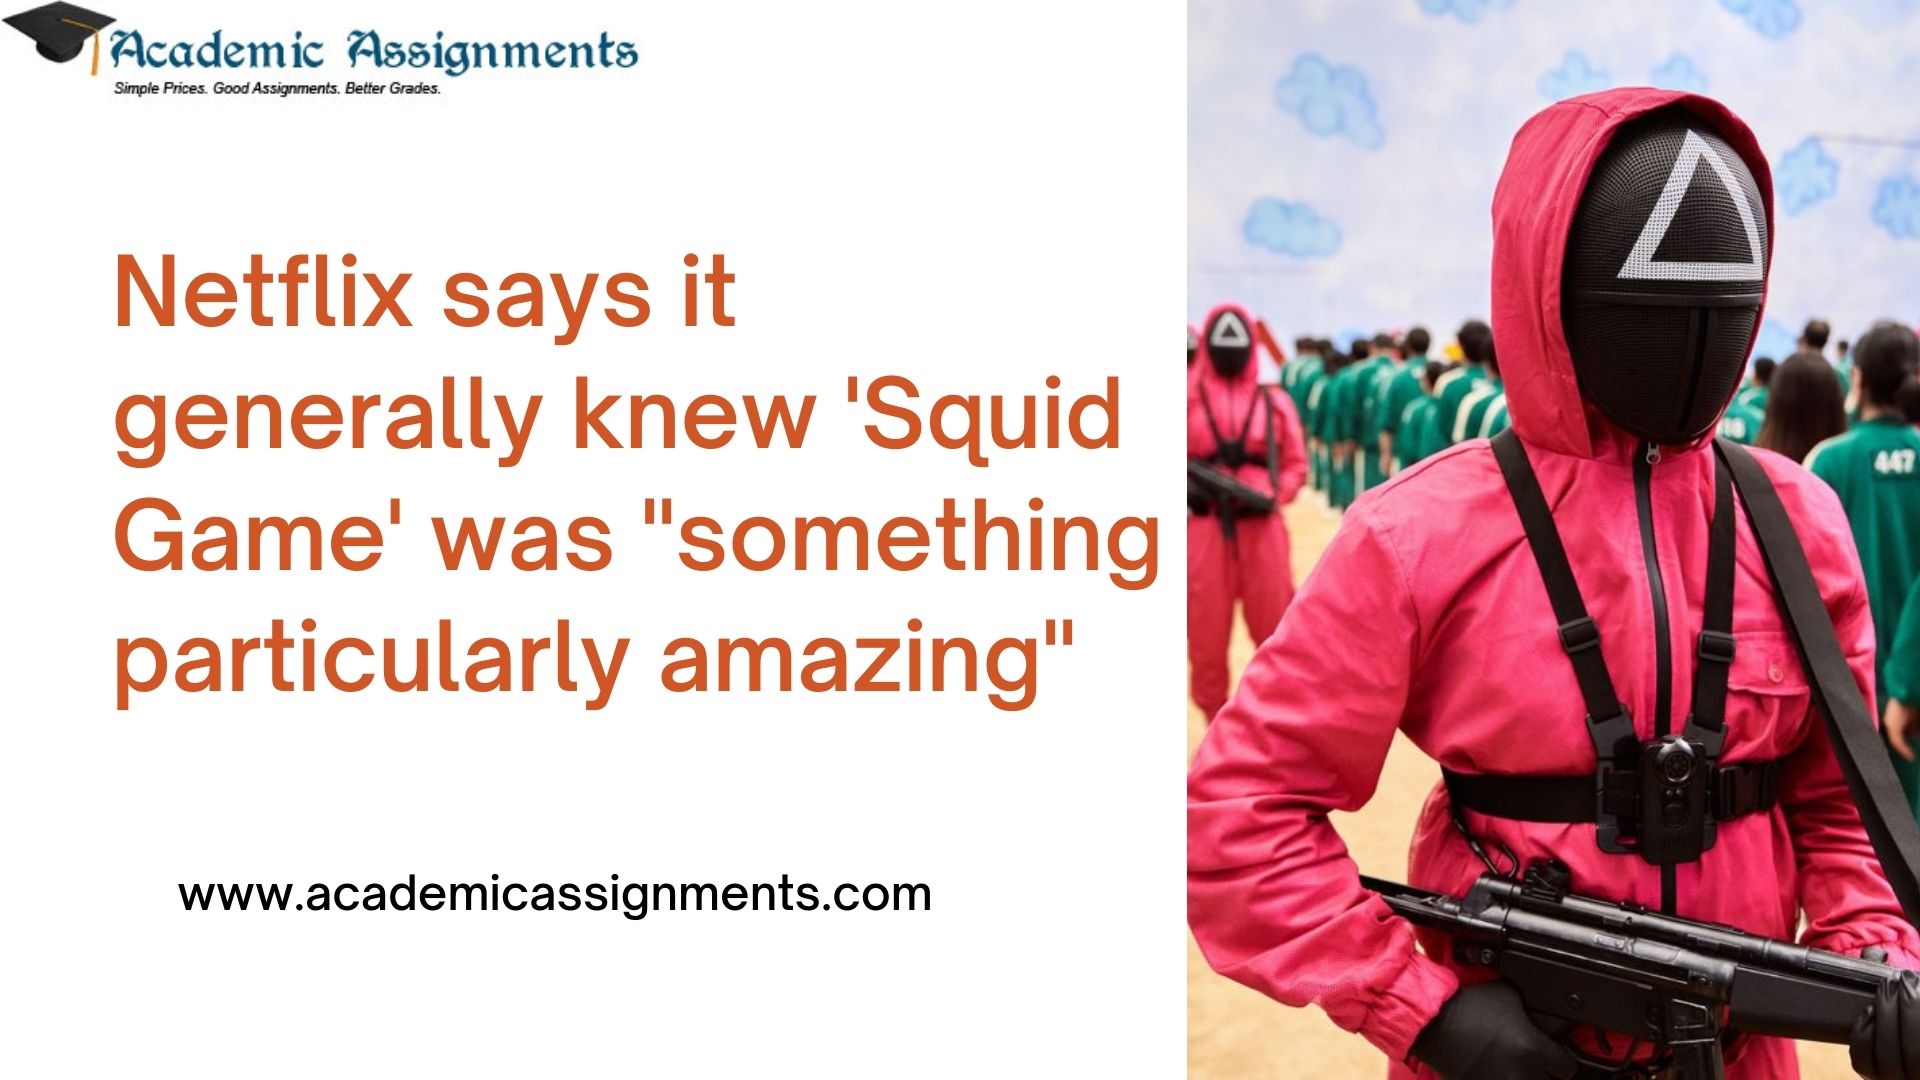 netflix-says-it-generally-knew-squid-game-was-something-amazing